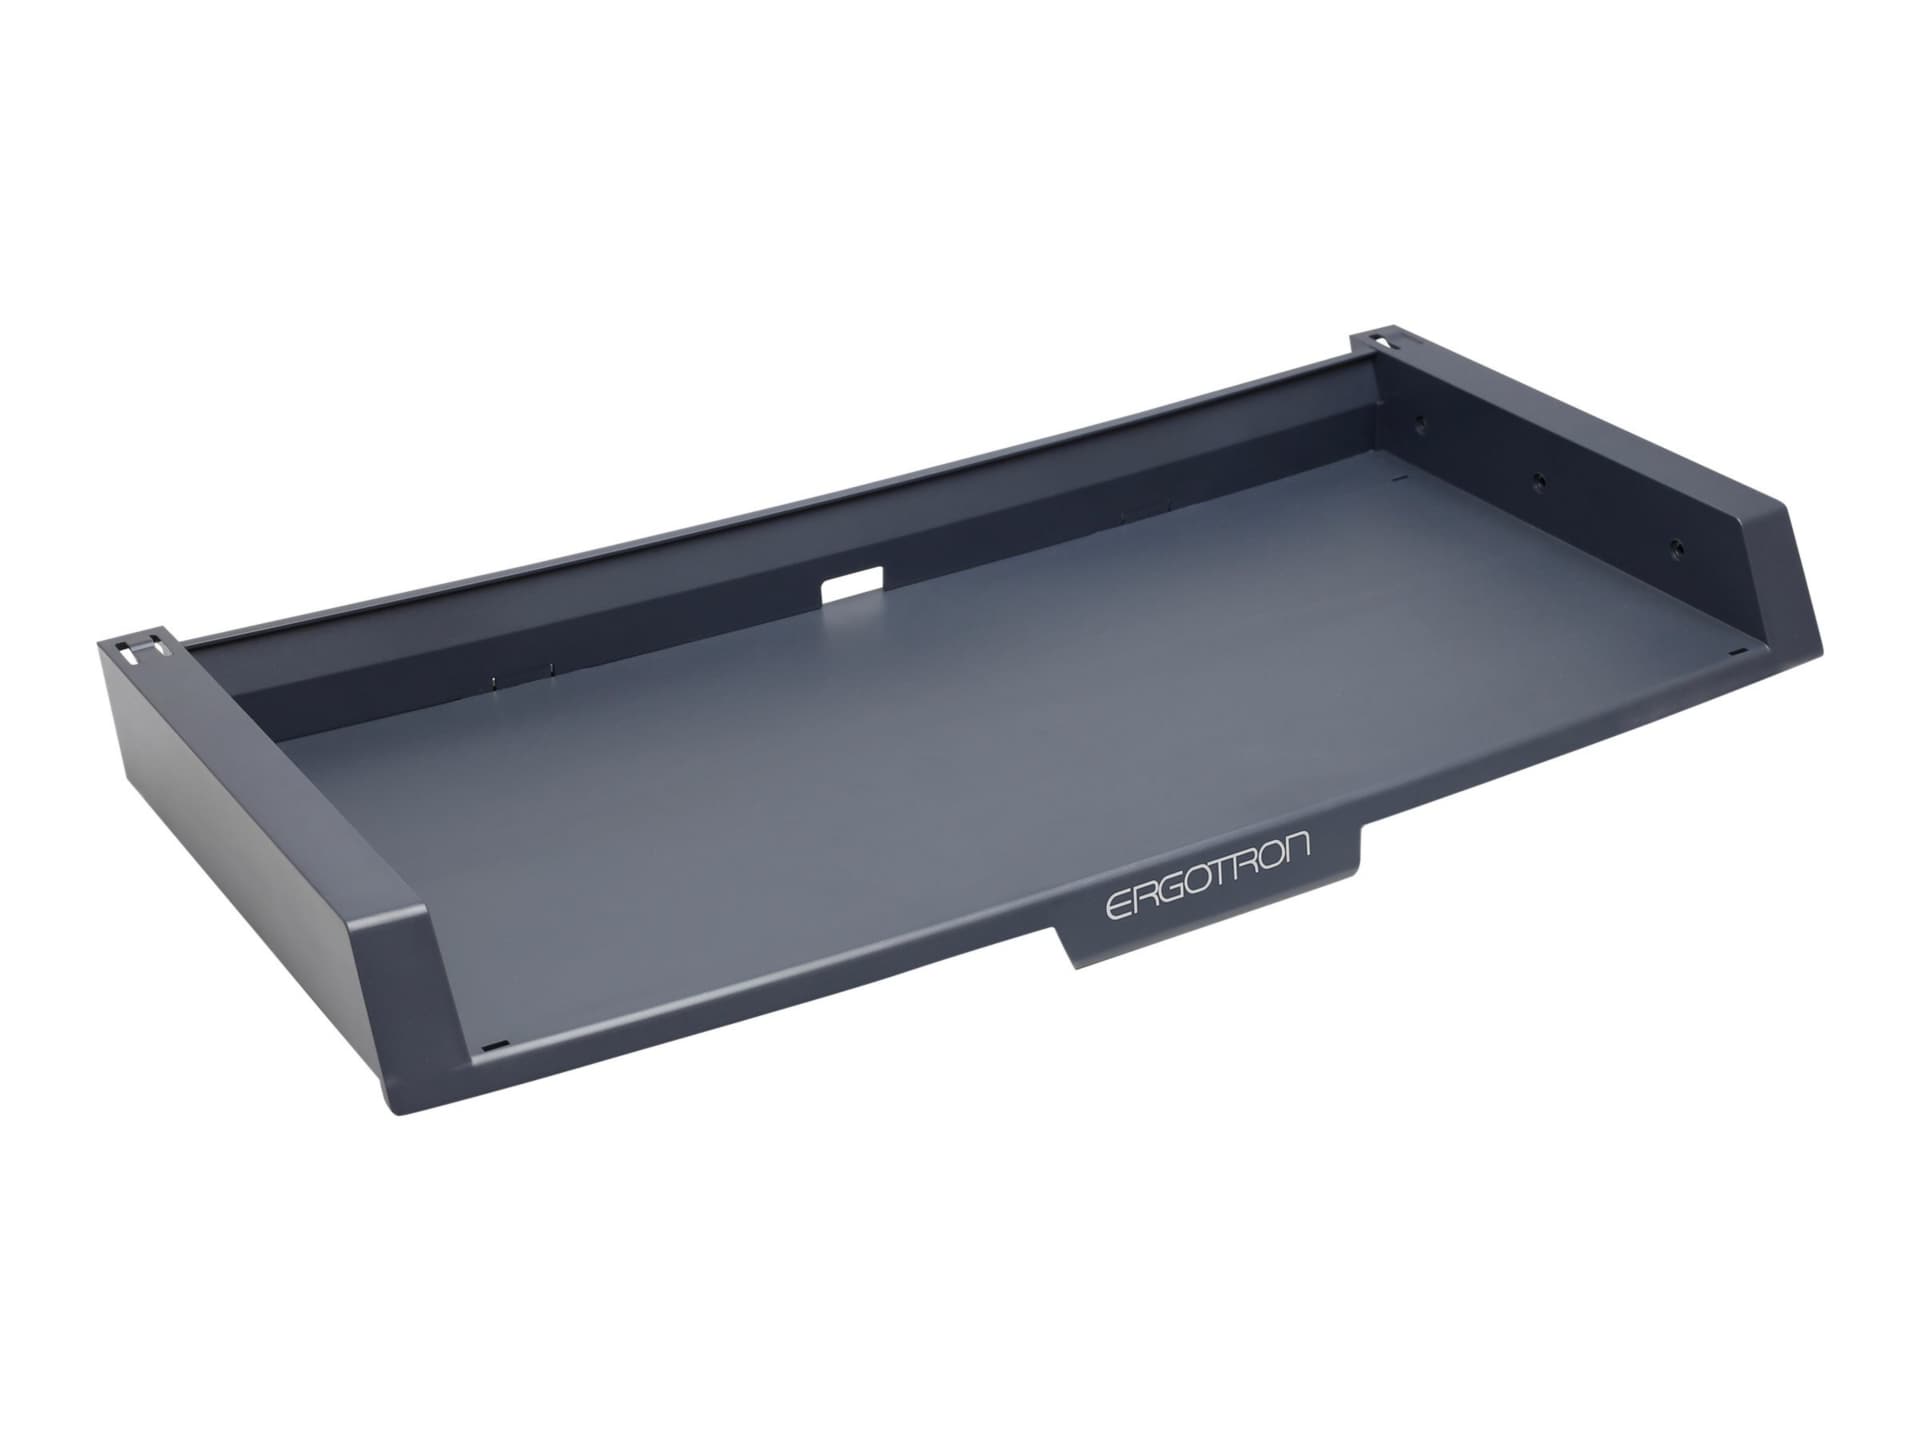 Ergotron Keyboard Tray with Debris Barrier Upgrade Kit mounting component - for keyboard / mouse - graphite gray